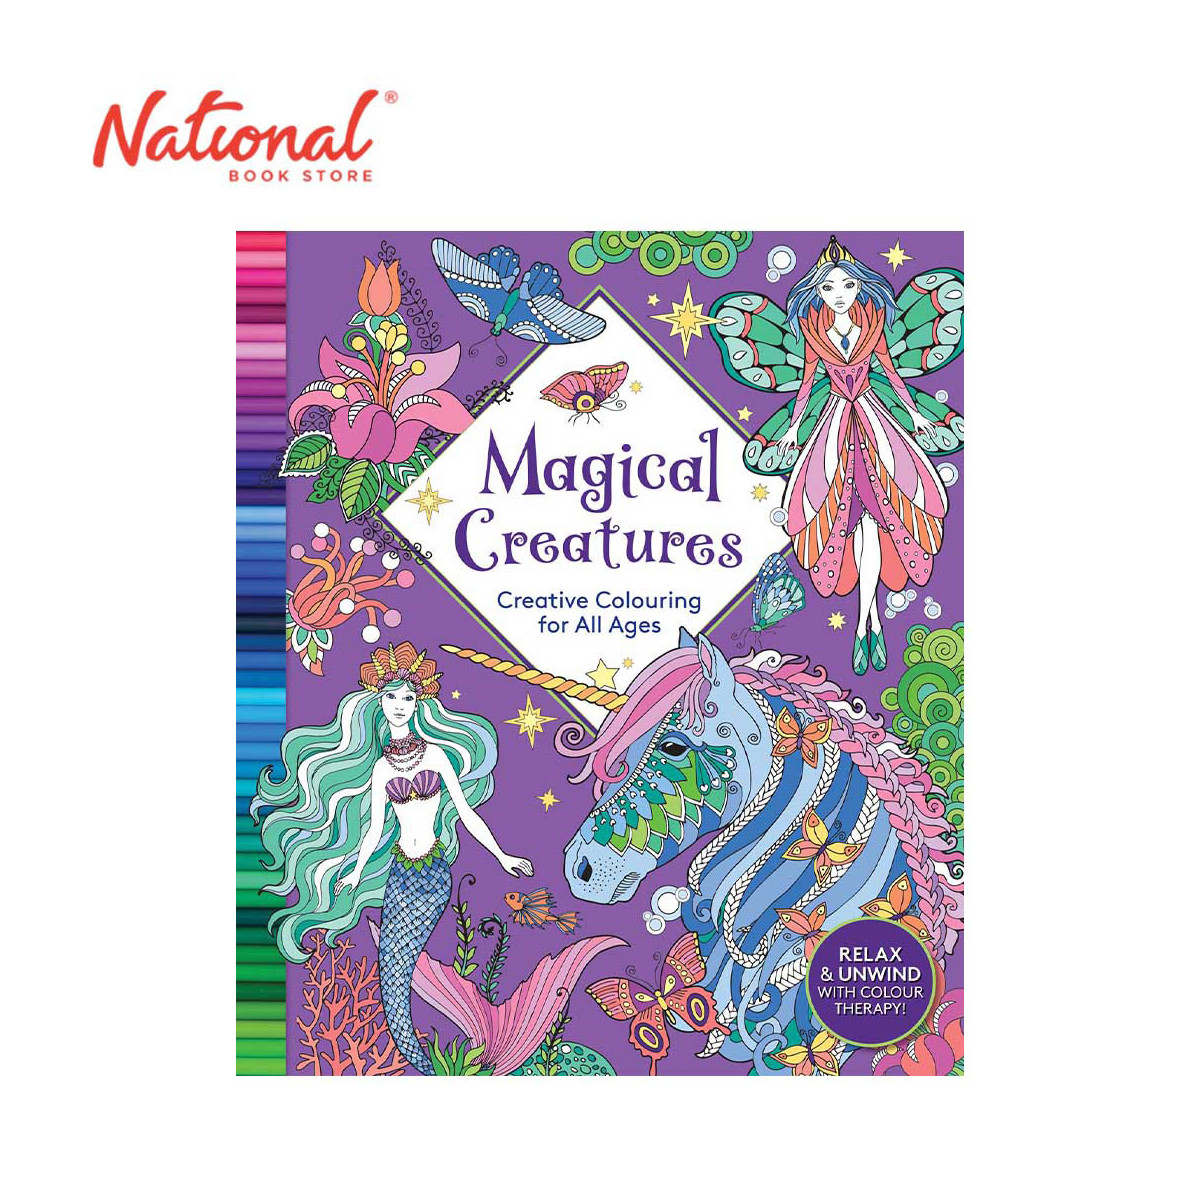 Magical Creatures: Creative Coloring for All AGes Trade Paperback - Coloring Book